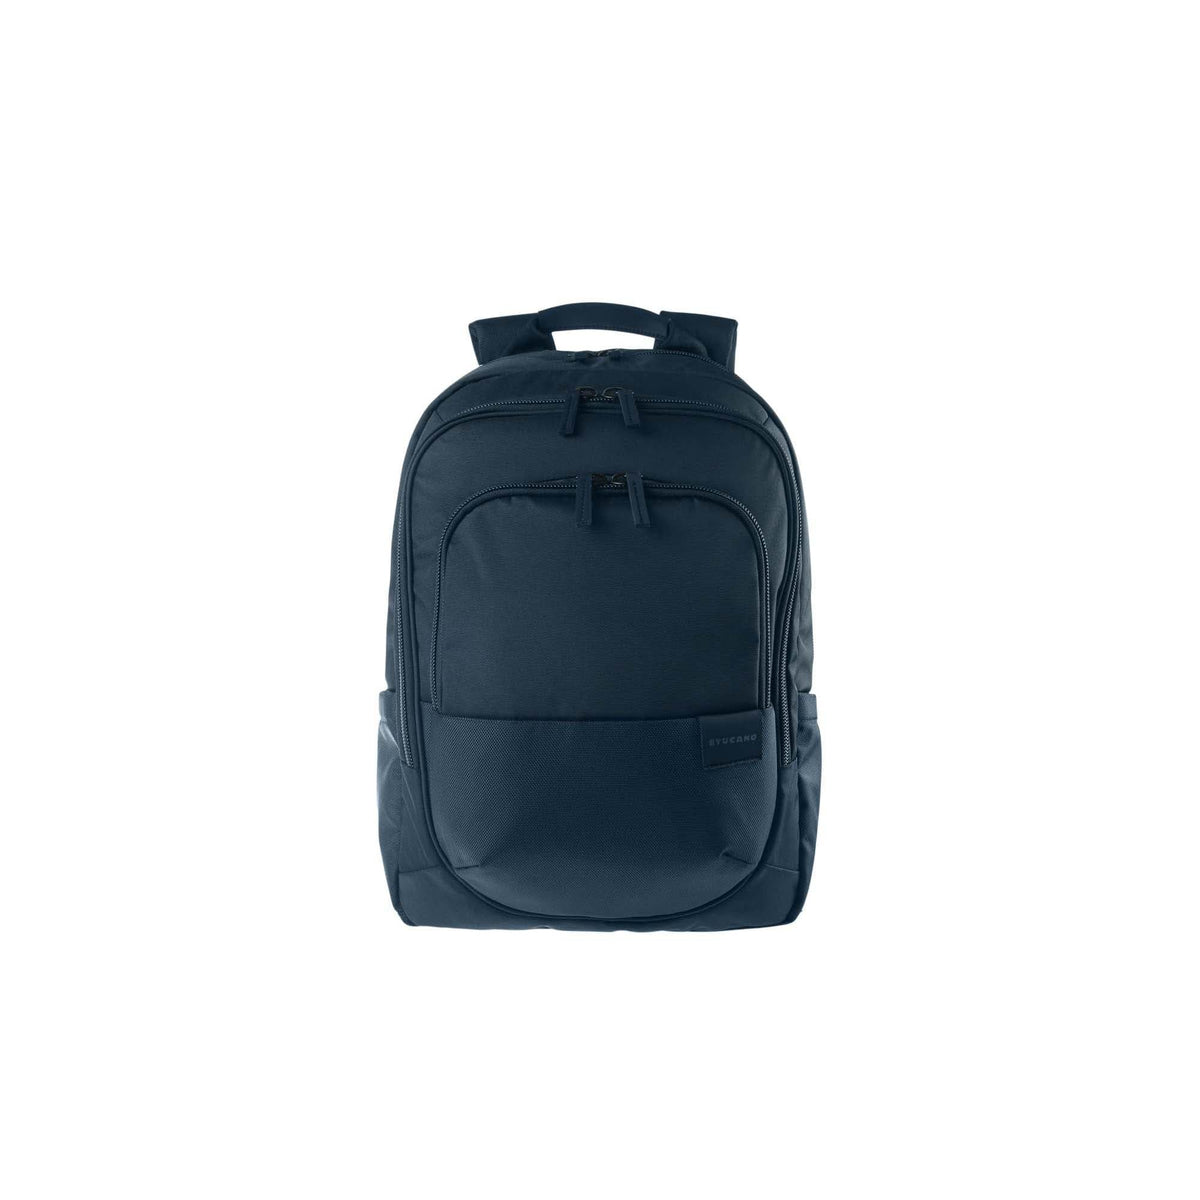 Tucano Stilo Backpack for 15" Macbook and Up to 17" Laptop